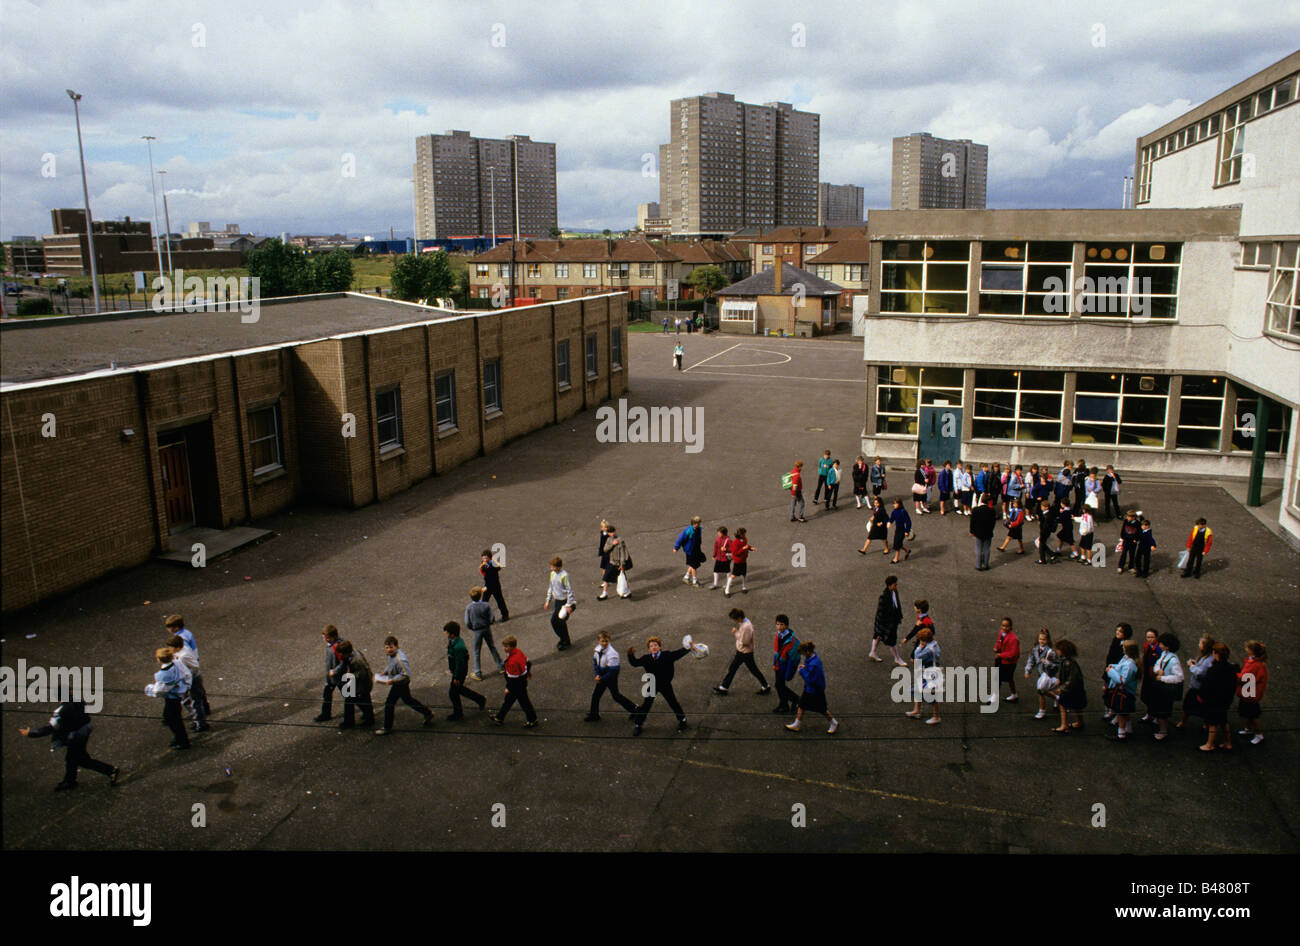 Holyrood Secondary School, Glasgow. Children file into class after lunch break. Stock Photo